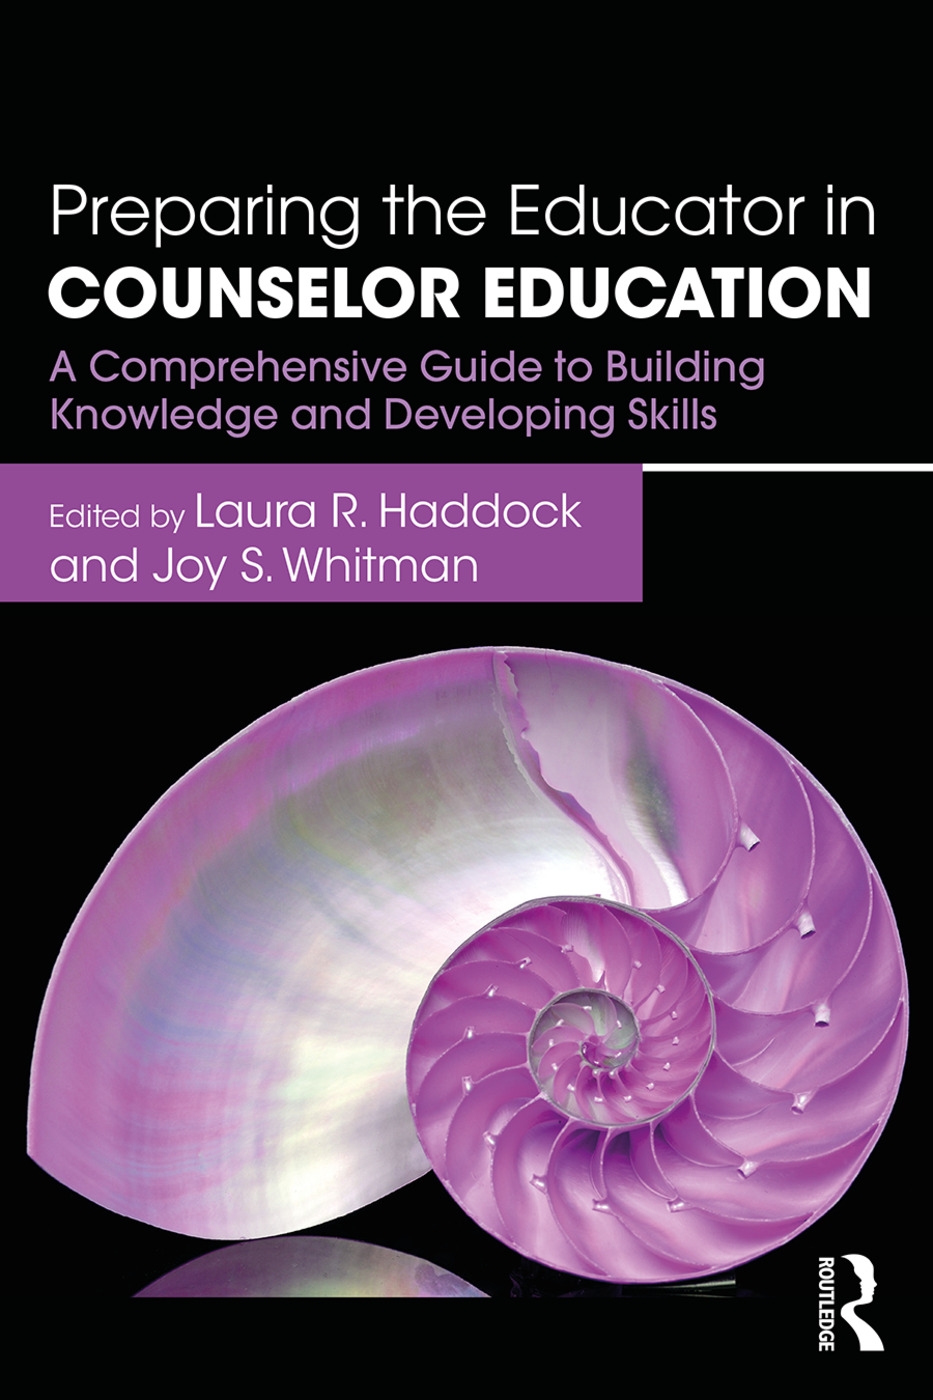 Preparing the Educator in Counselor Education: A Comprehensive Guide to Building Knowledge and Developing Skills